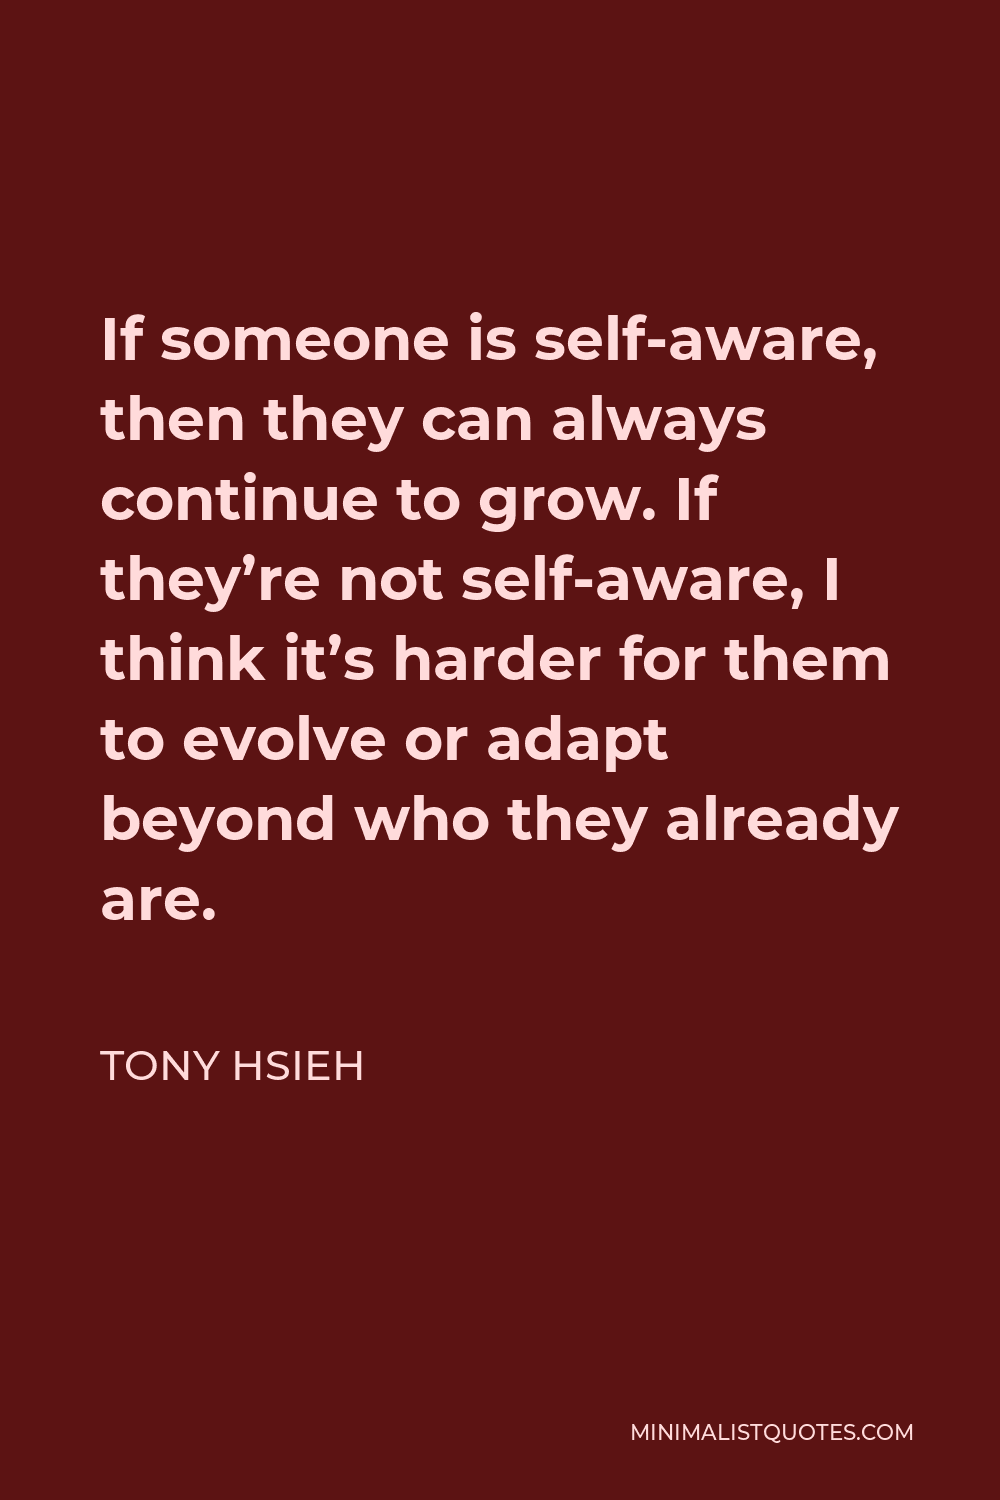 Tony Hsieh Quote - If someone is self-aware, then they can always continue to grow. If they’re not self-aware, I think it’s harder for them to evolve or adapt beyond who they already are.